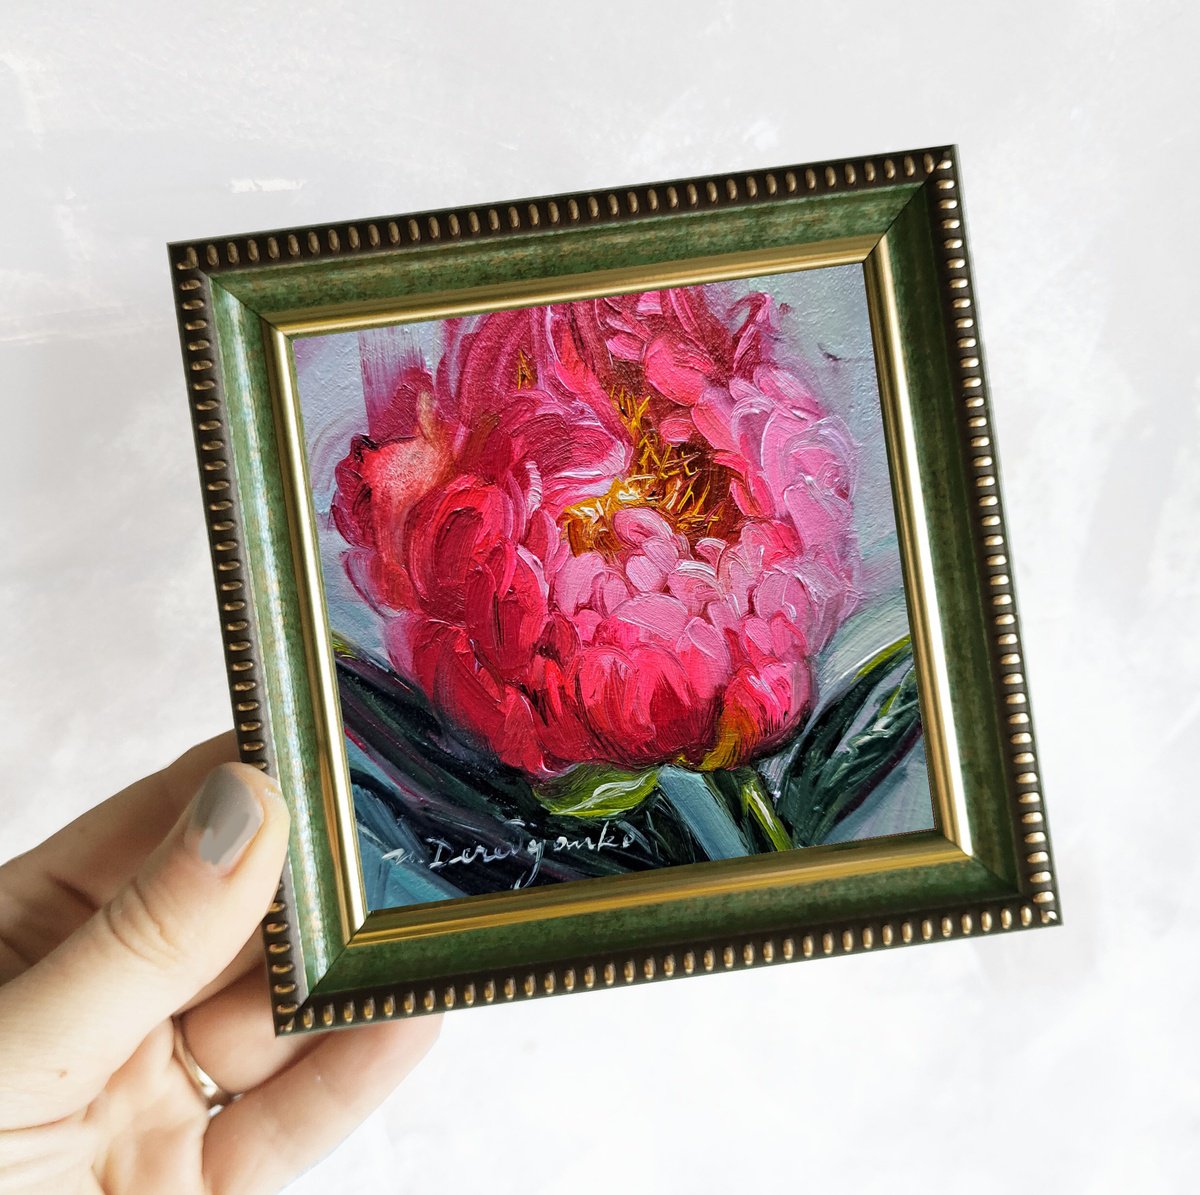 Small oil painting original framed art Hot pink peony flower 10x10 cm by Nataly Derevyanko